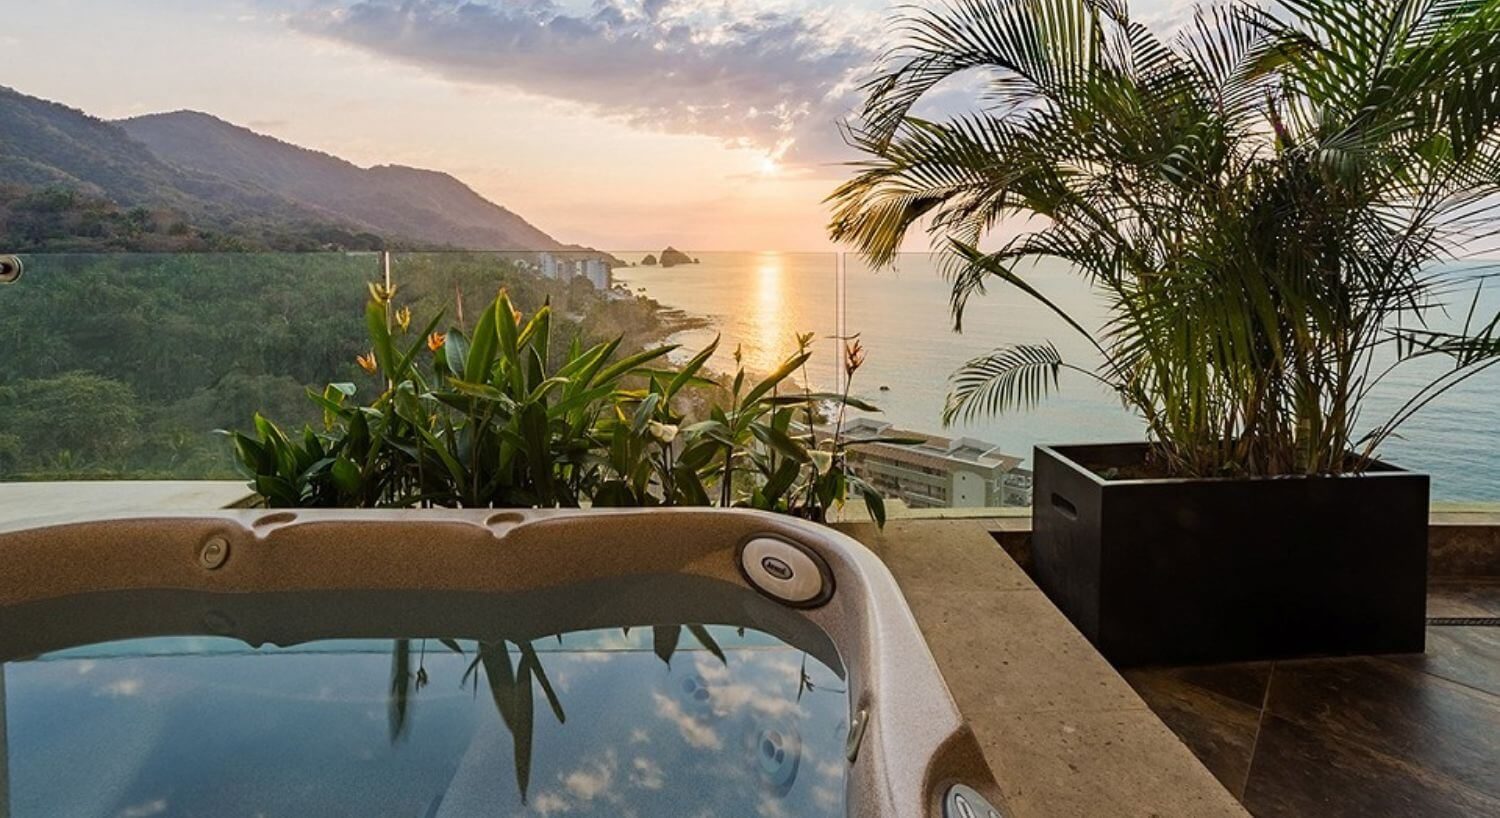 An outdoor hot tub on a balcony high above ground in the mountains with stunning sunset views of the ocean and mountains.